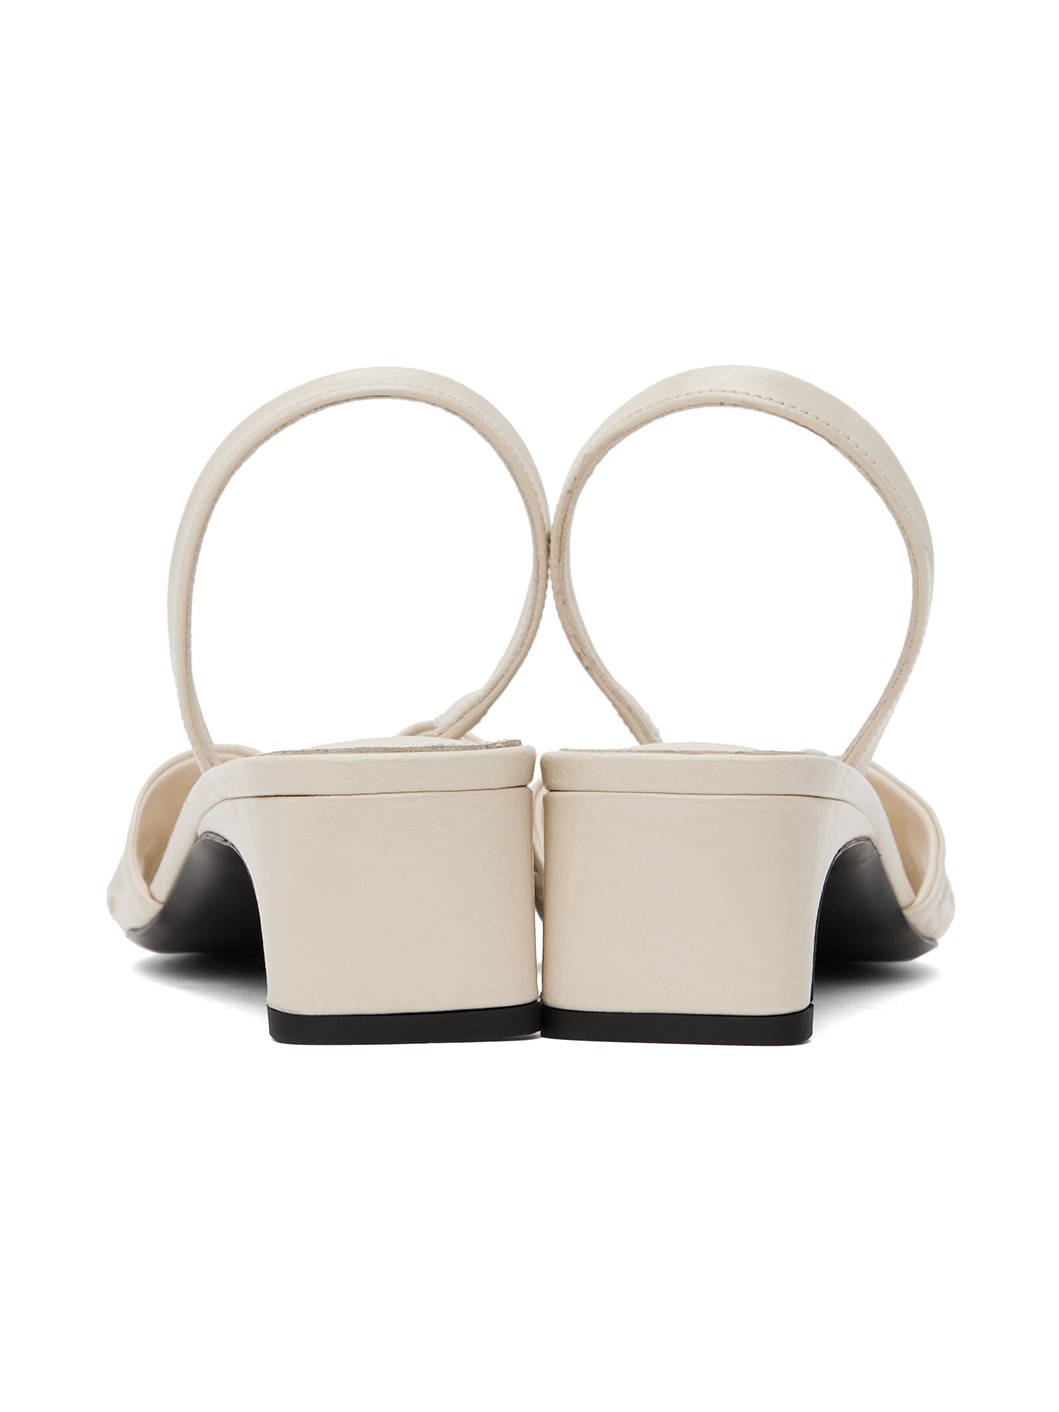 Off-White 'The Gathered Scoop' Heeled Sandals - 2